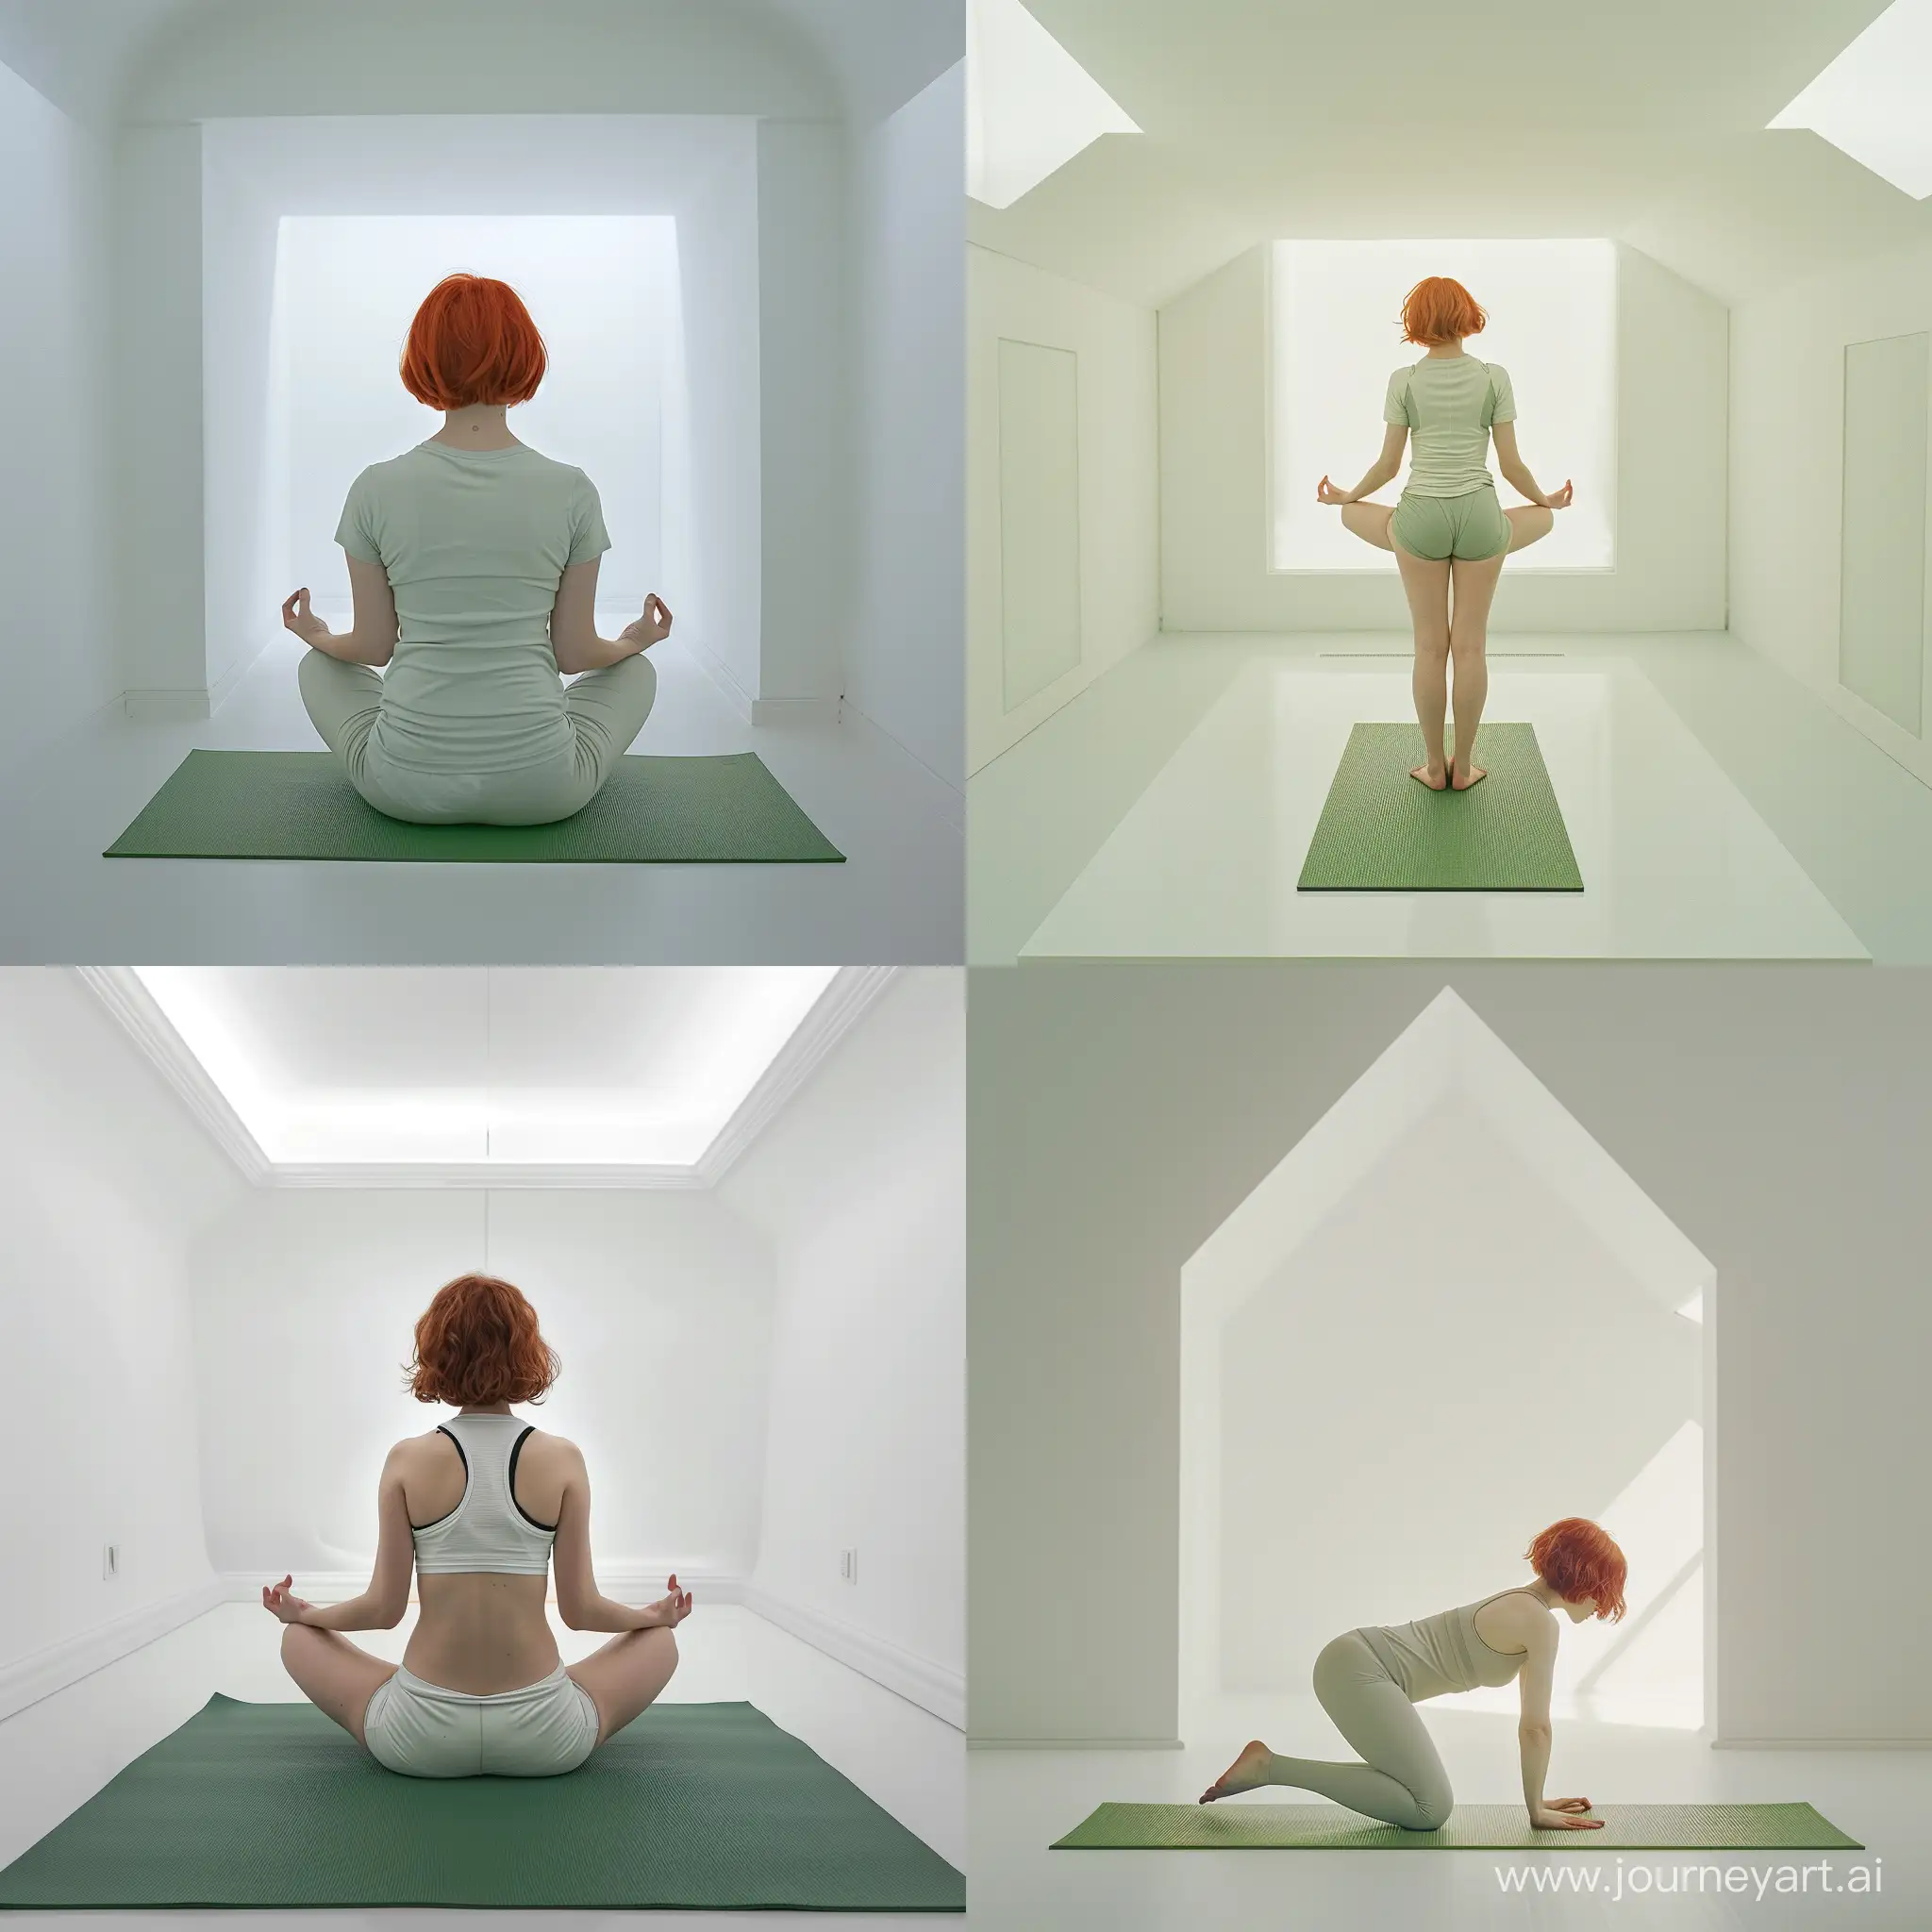 ultra realistic photo of a girl with short and red hair doing yoga in a white room on a green yoga mat